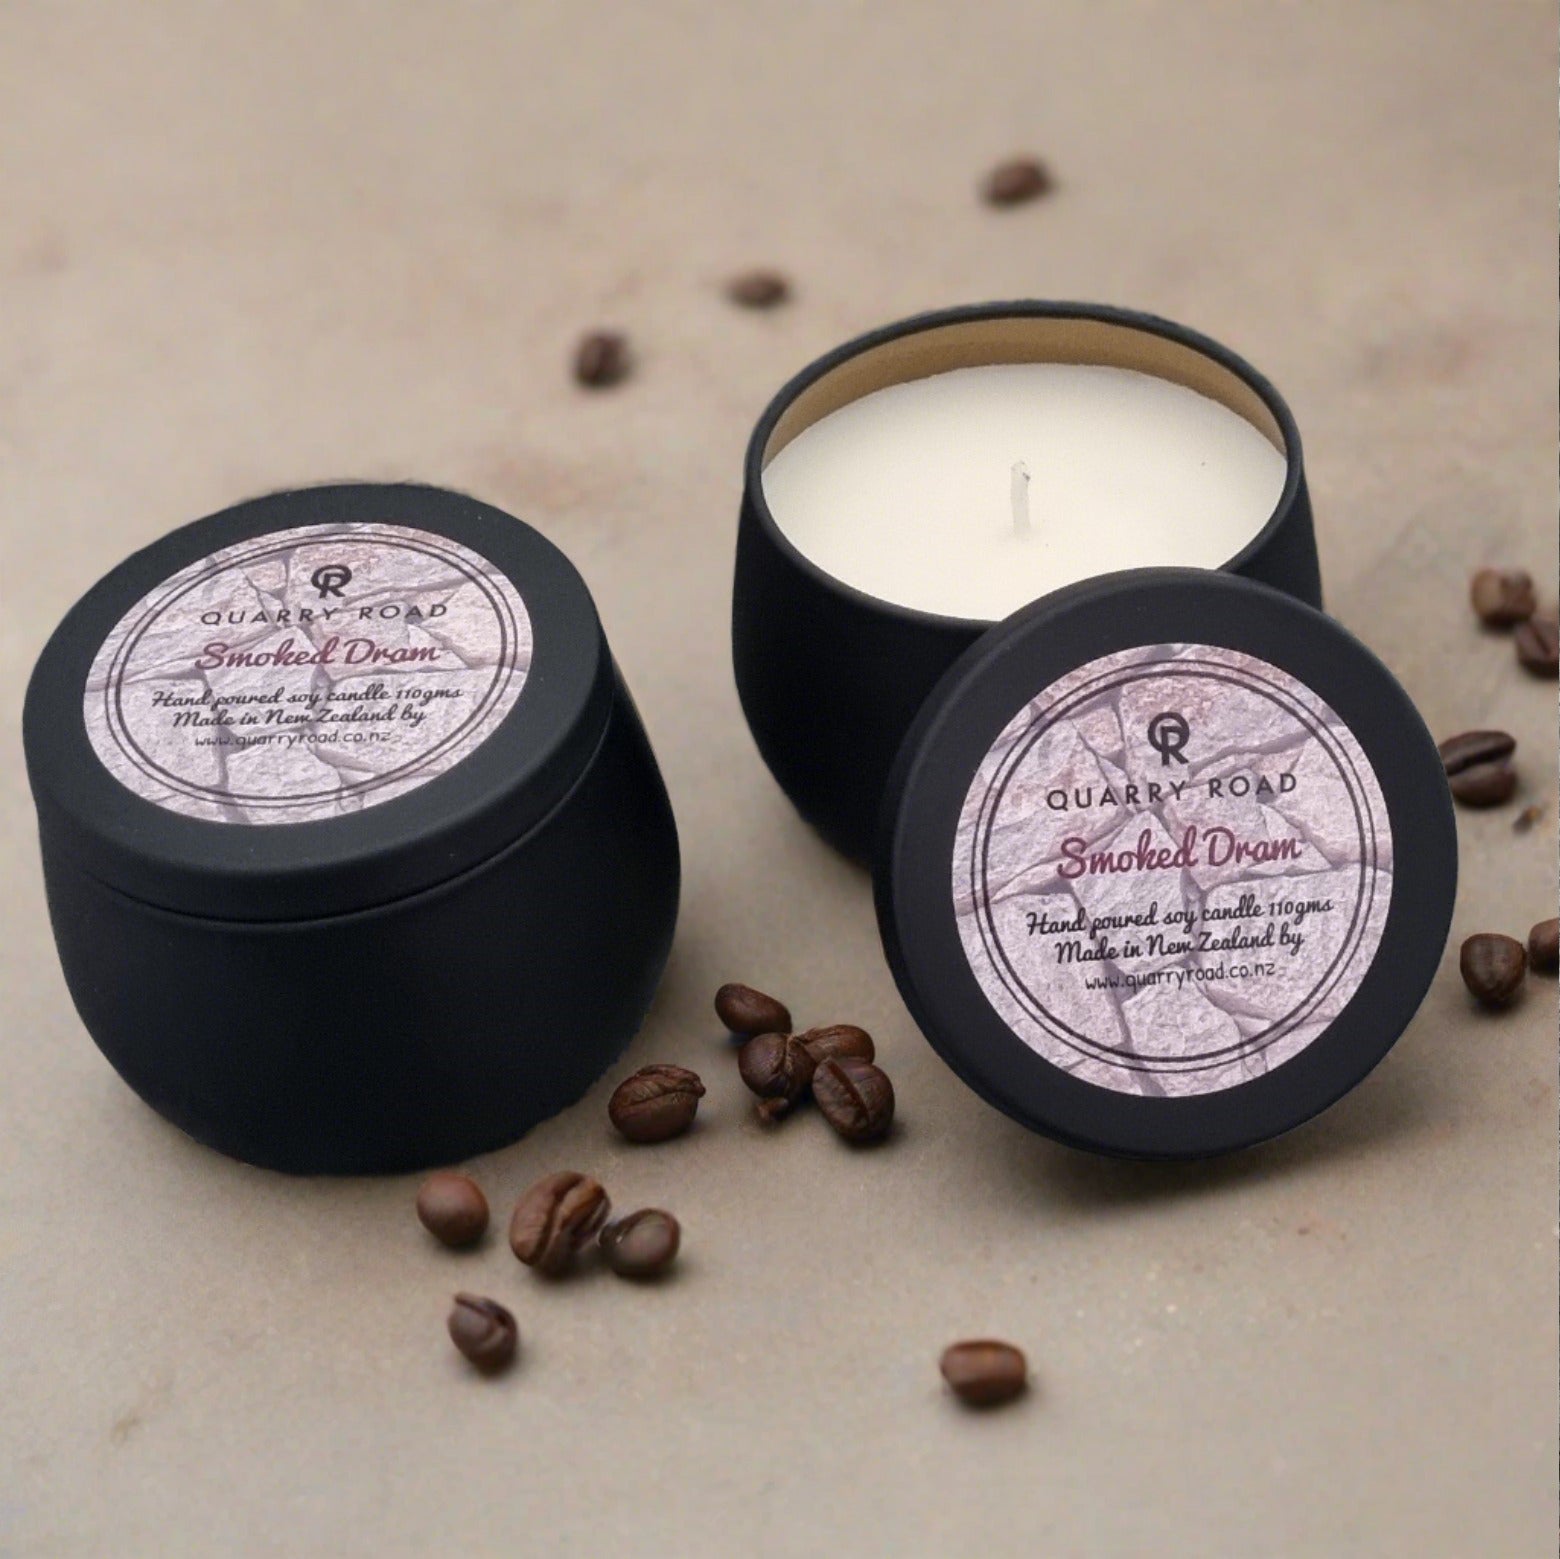 Lovely smaller candle 100g wax and fragrance to delight your senses. Complete with lid for easy stress-free transport.